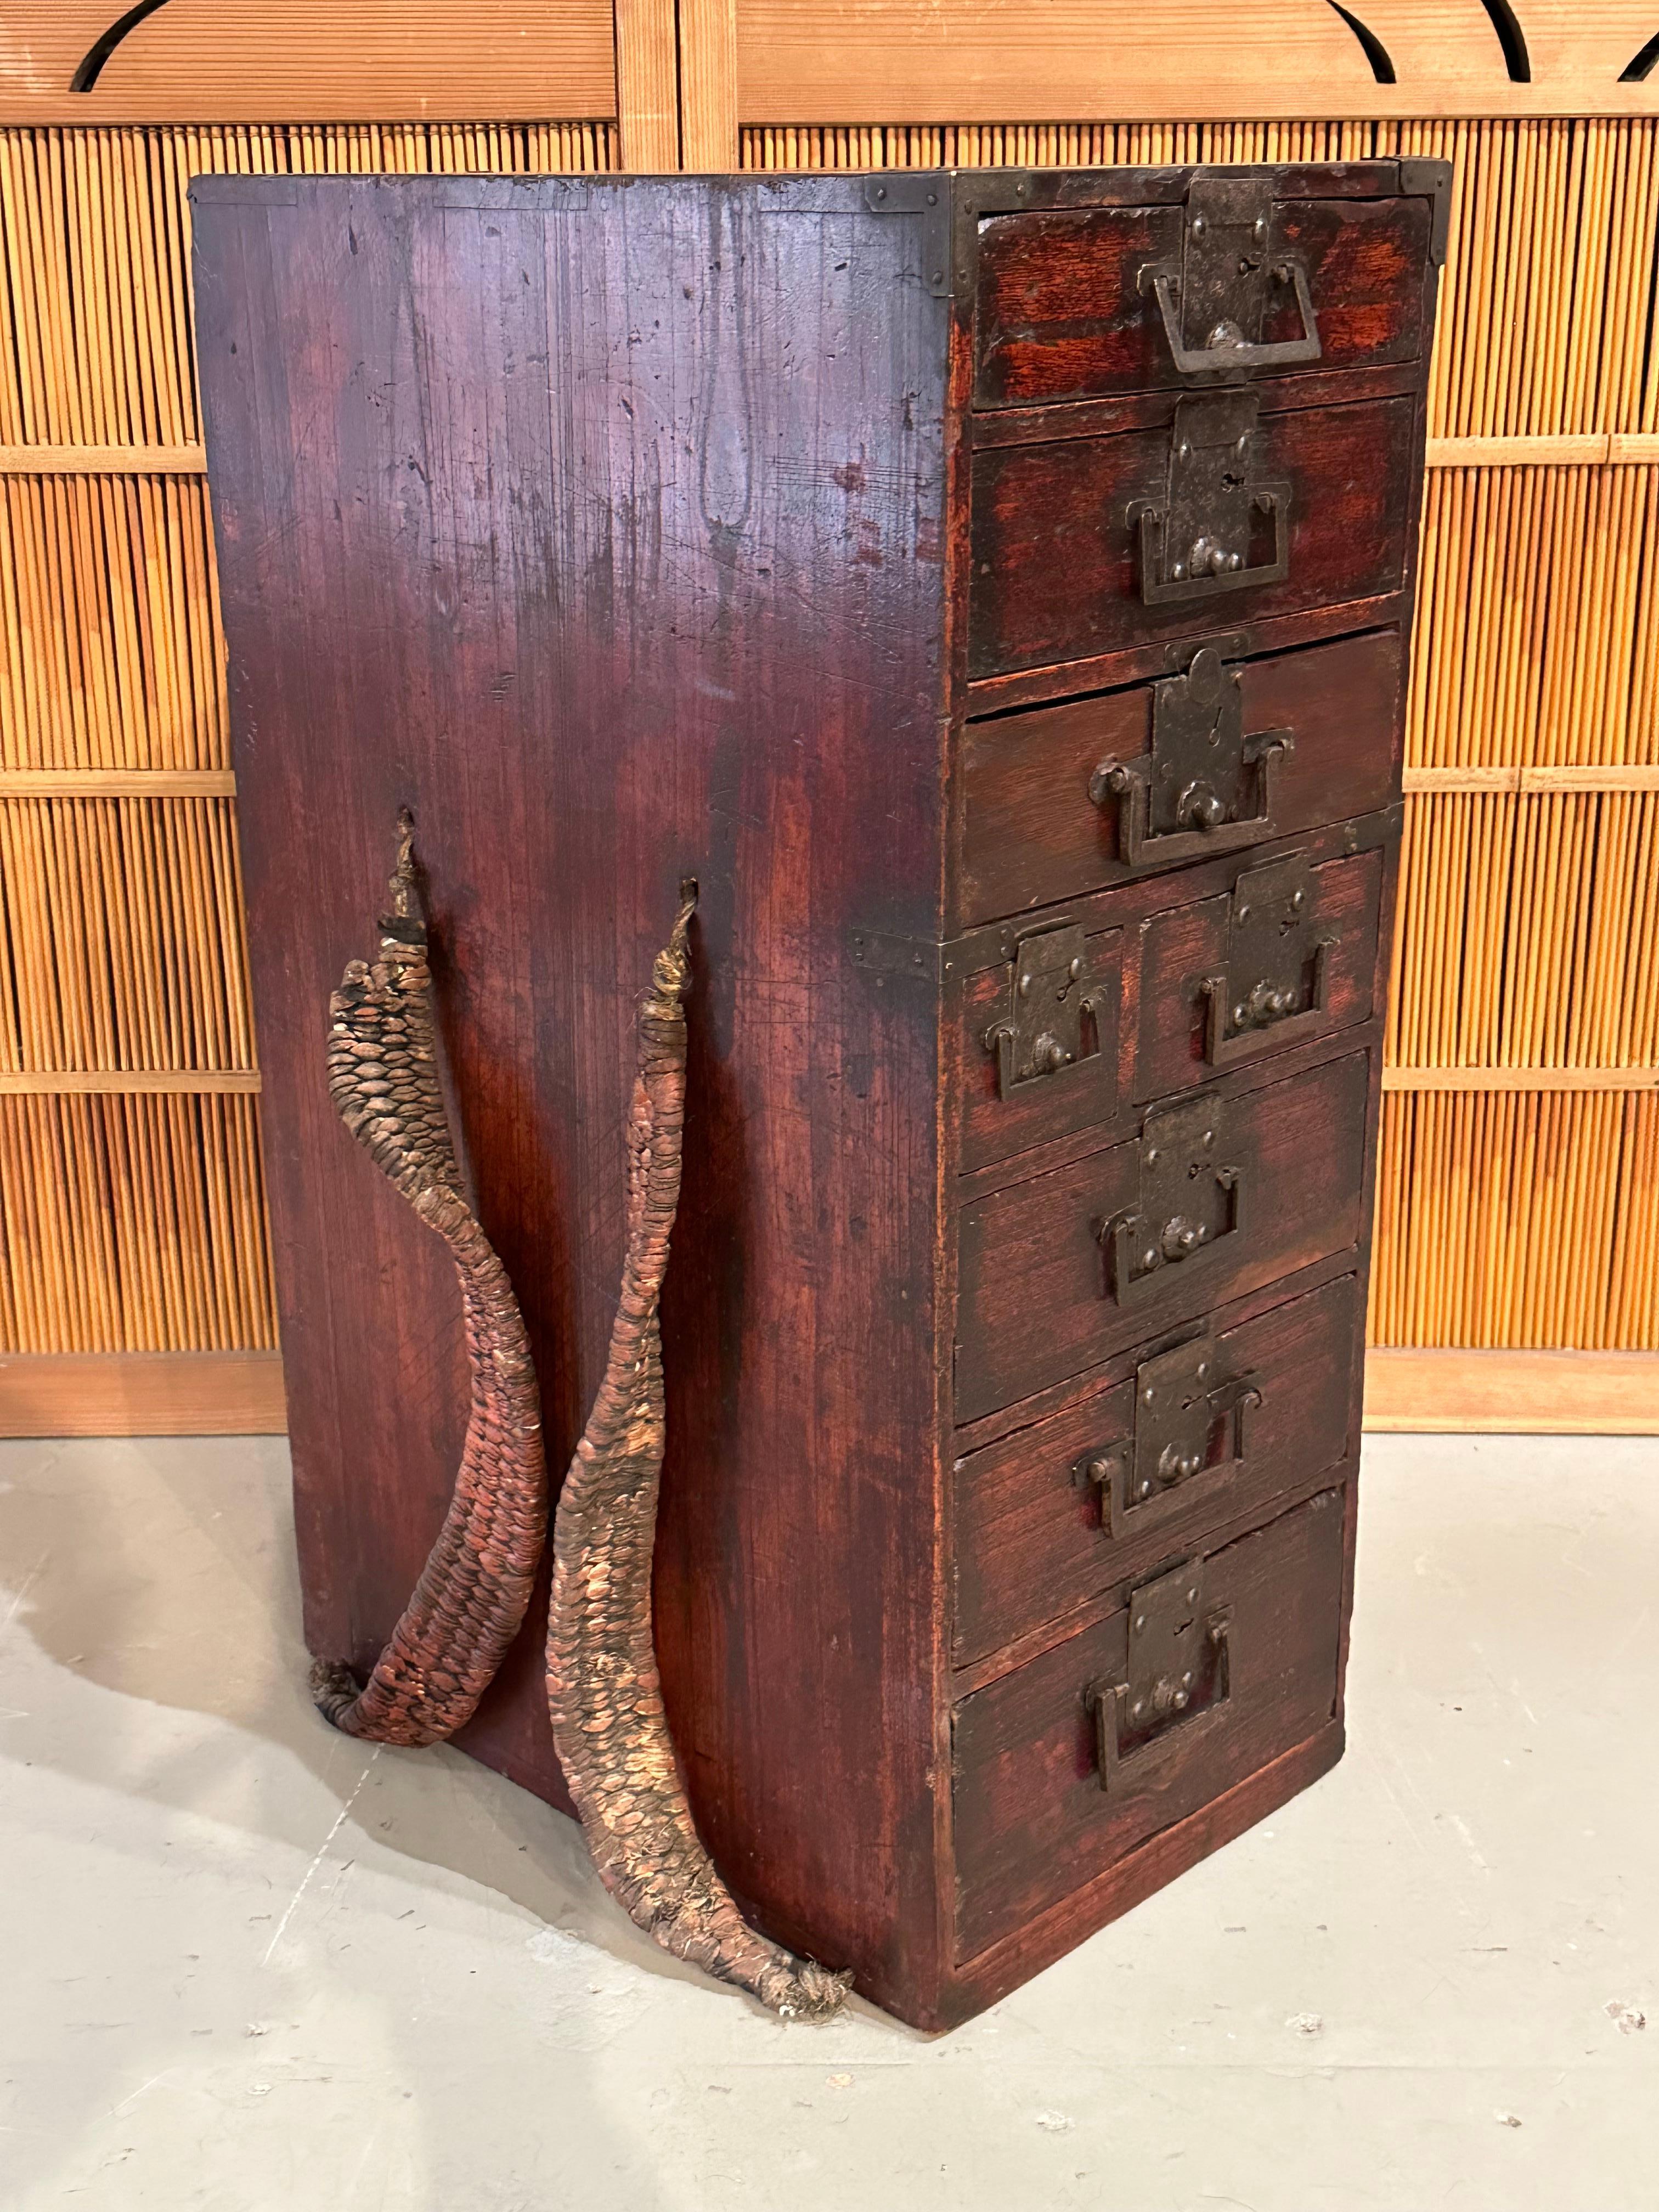 Available from Shogun's Gallery in Portland, Oregon for Over 40 Years Specializing in Asian Arts & Antiques.

This tansu is around 200 year old. It is an antique Japanese gyoshobako-dansu (peddler's chest) from the mid/late Edo Era (c. 1820). It was